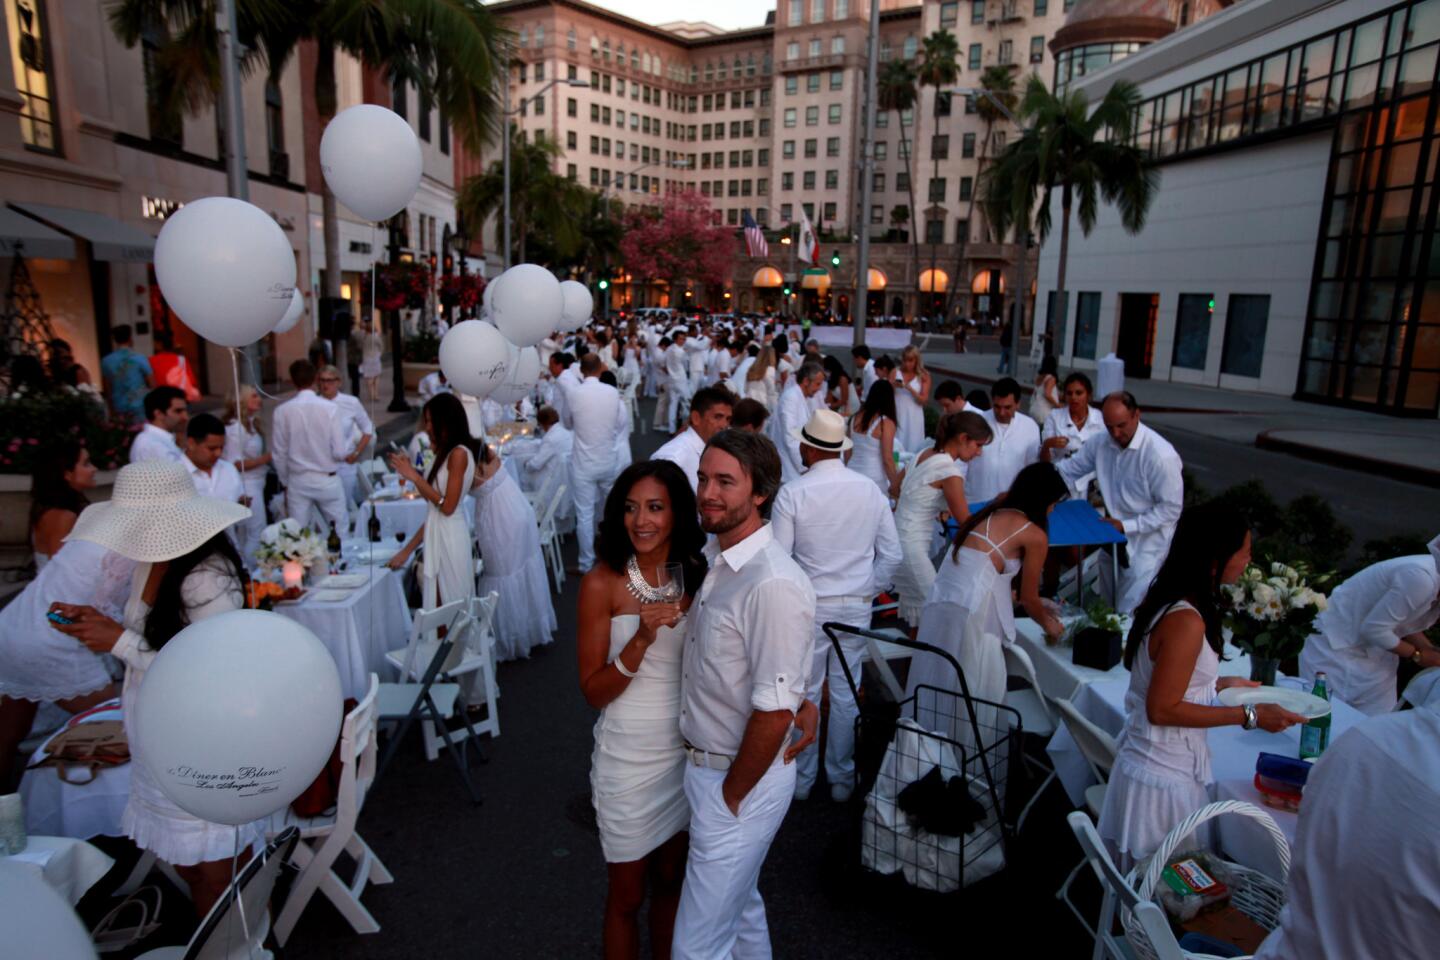 Beverly Hills was bathed in white as more than 1,200 people descended on Rodeo Drive with tables and chairs for a flash-mob dinner called Diner en Blanc.